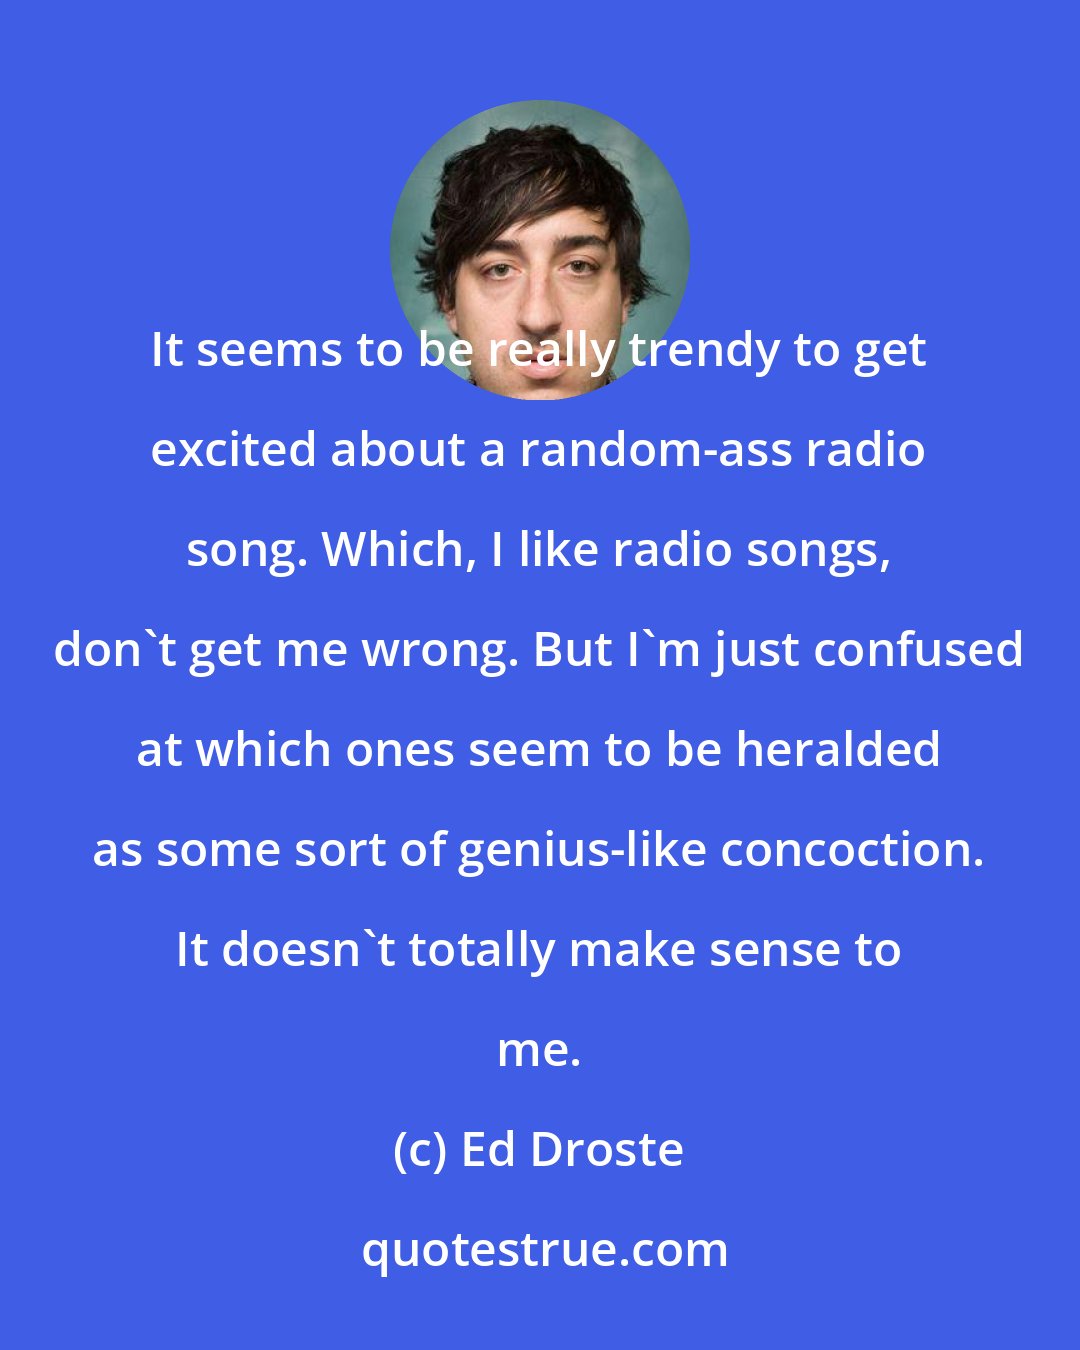 Ed Droste: It seems to be really trendy to get excited about a random-ass radio song. Which, I like radio songs, don't get me wrong. But I'm just confused at which ones seem to be heralded as some sort of genius-like concoction. It doesn't totally make sense to me.